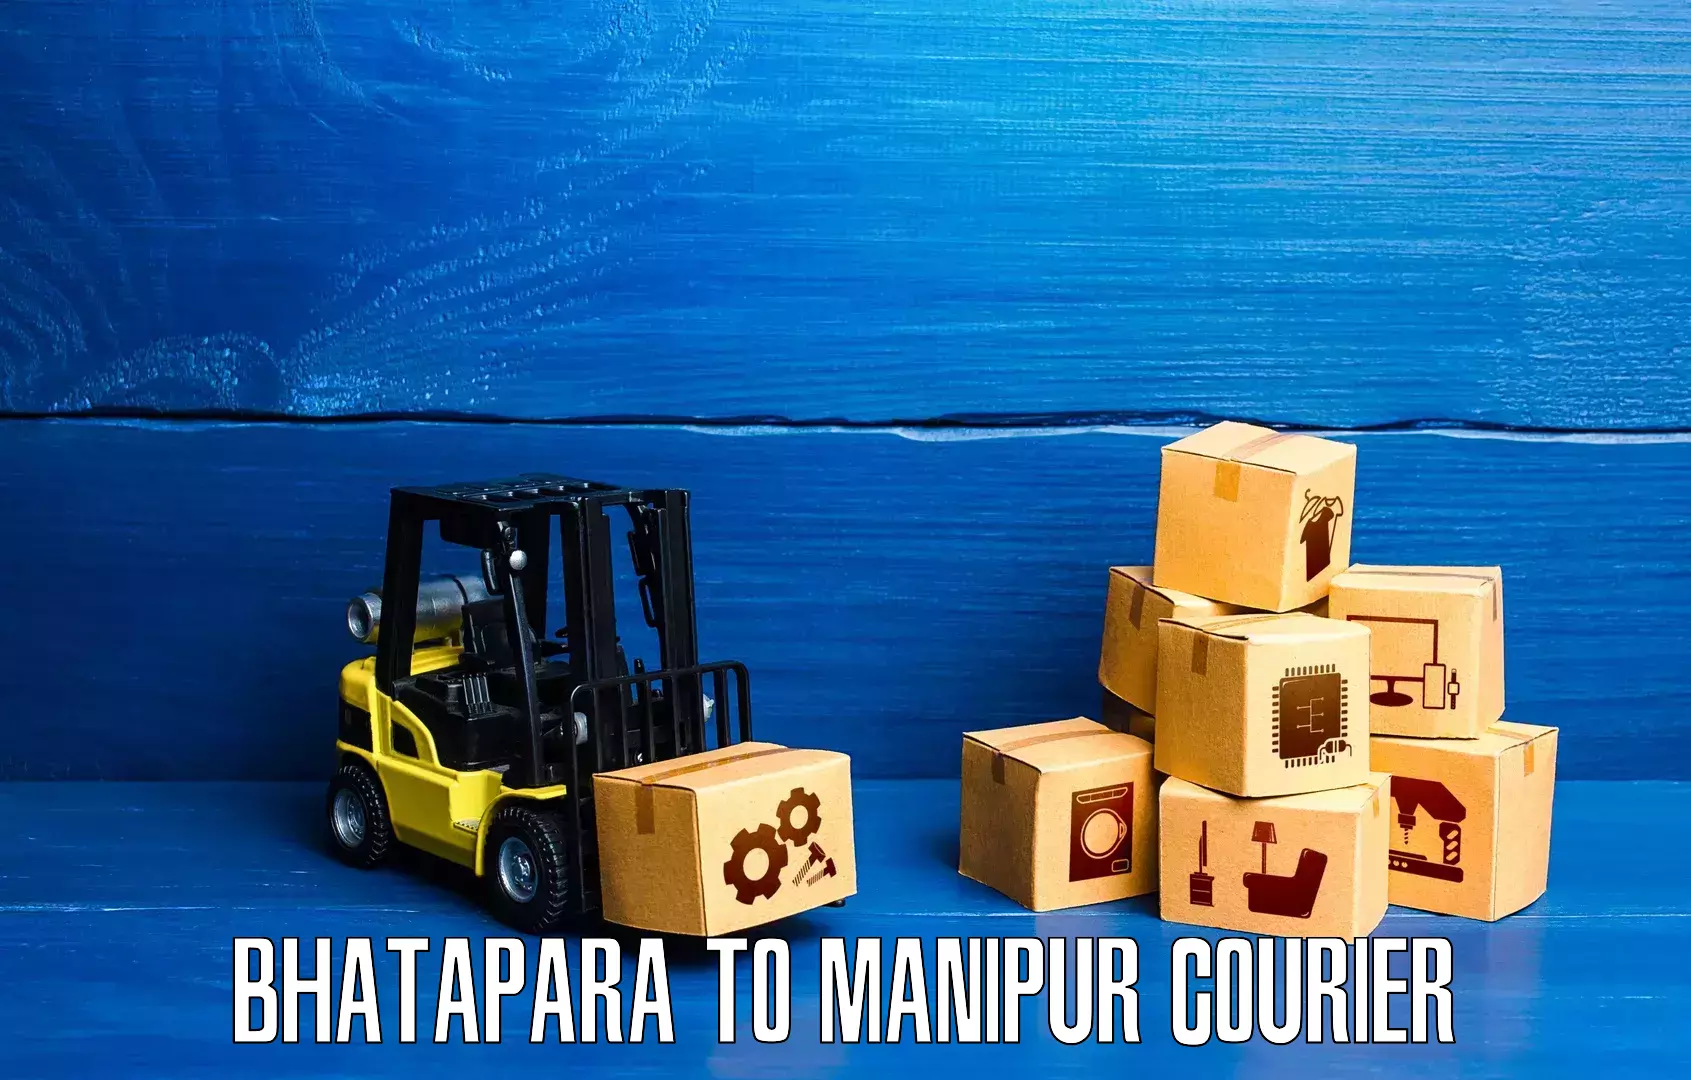 Express delivery network Bhatapara to Manipur